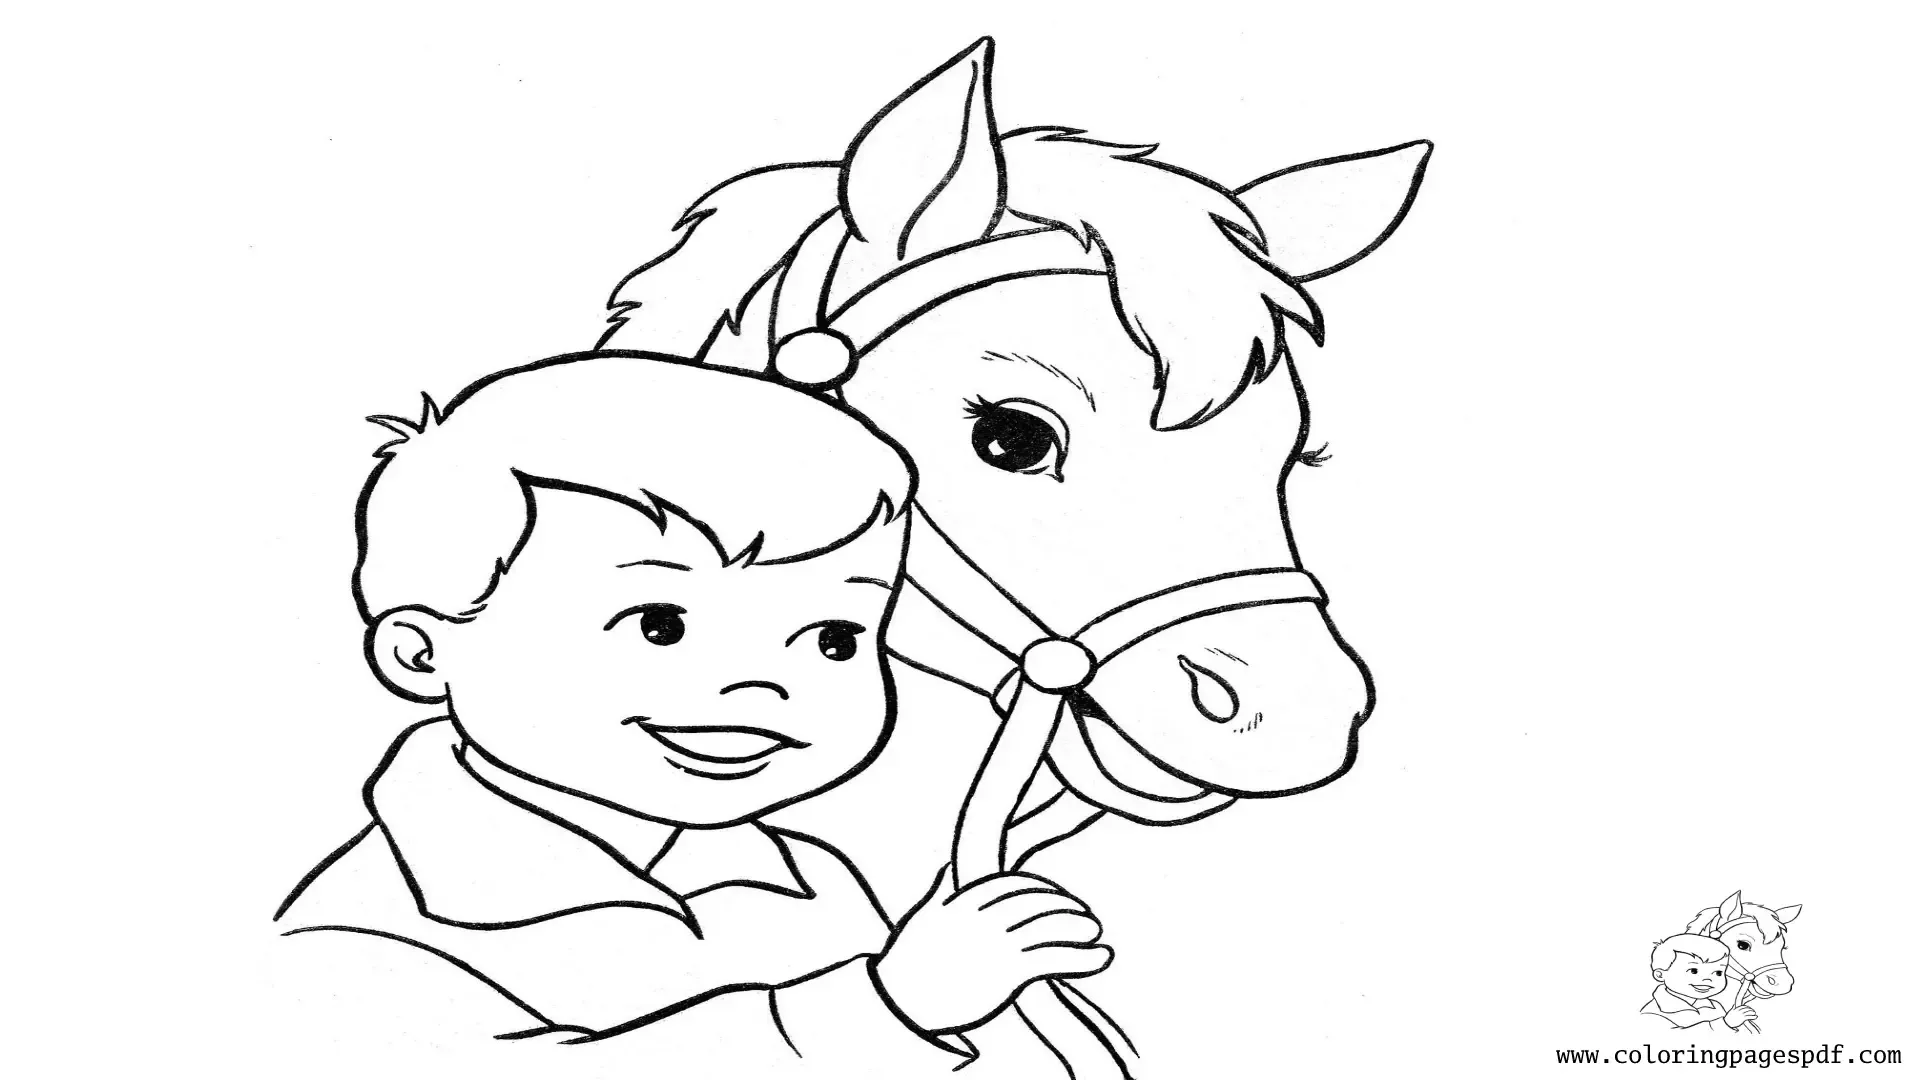 Coloring Page Of A Horse With A Kid